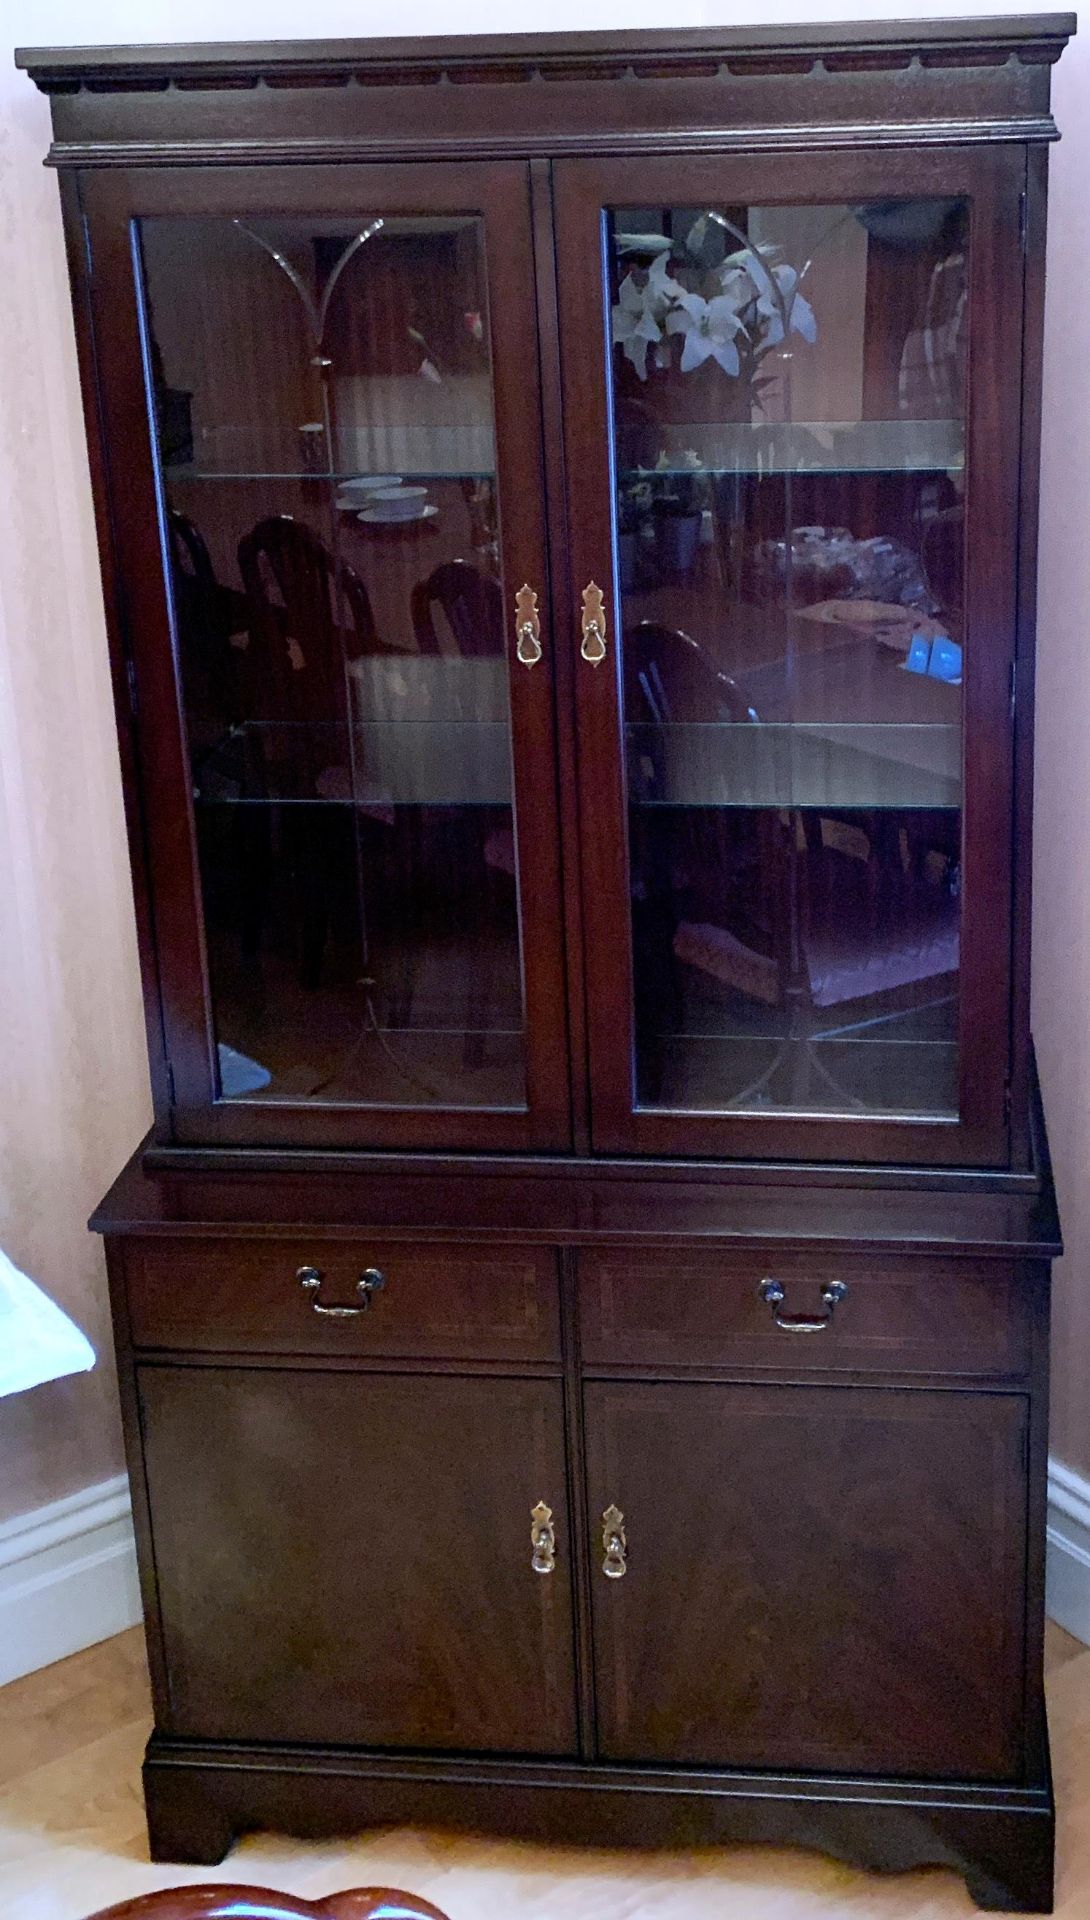 A Strongbow Furniture mahogany finish wall unit with two upper glazed doors with two glass shelves - Image 2 of 2